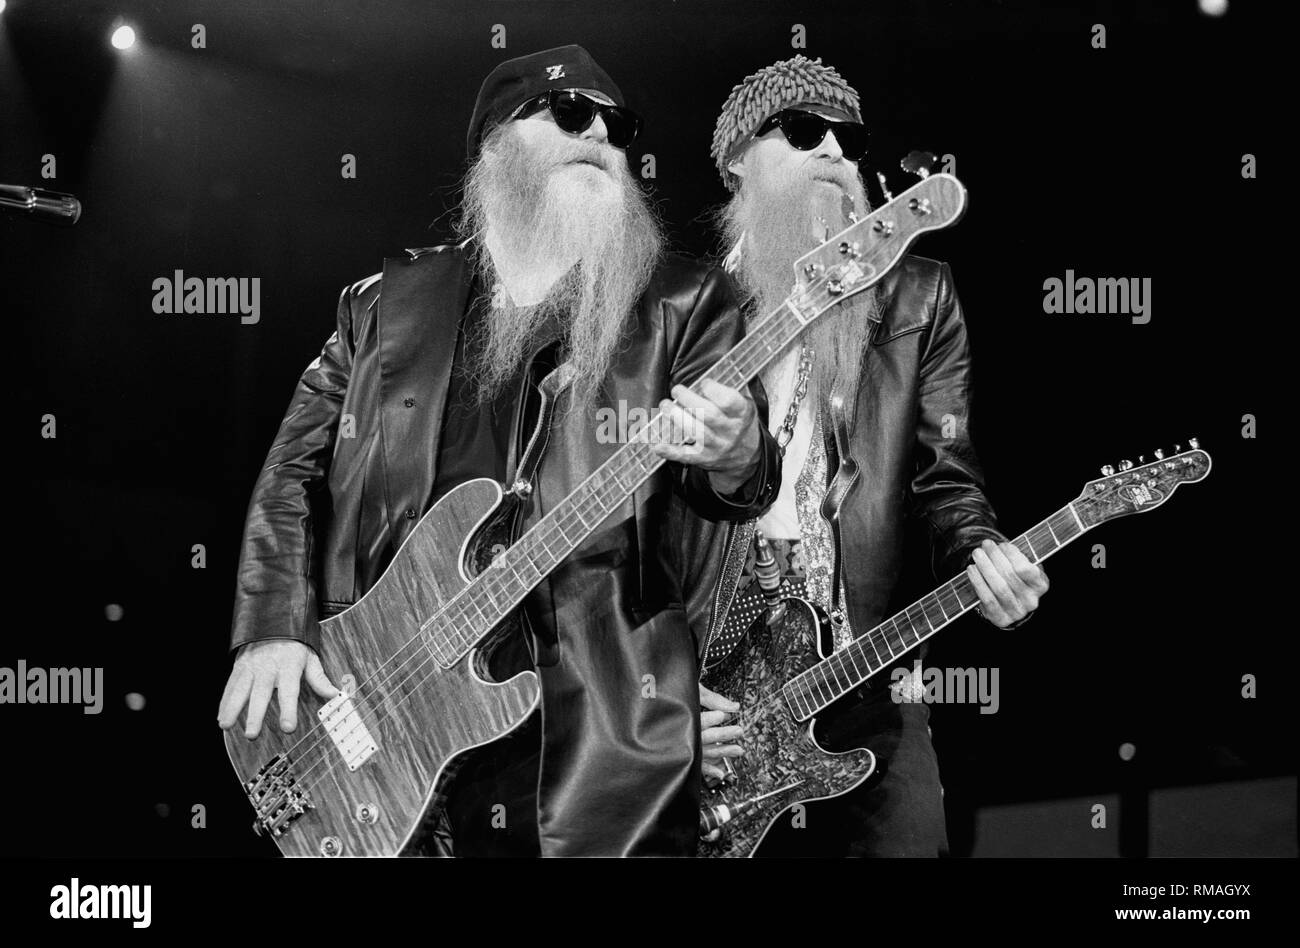 Musicians Dusty Hill and Billy Gibbons of the rock band ZZ Top are shown performing on stage during a 'live' appearance. Stock Photo